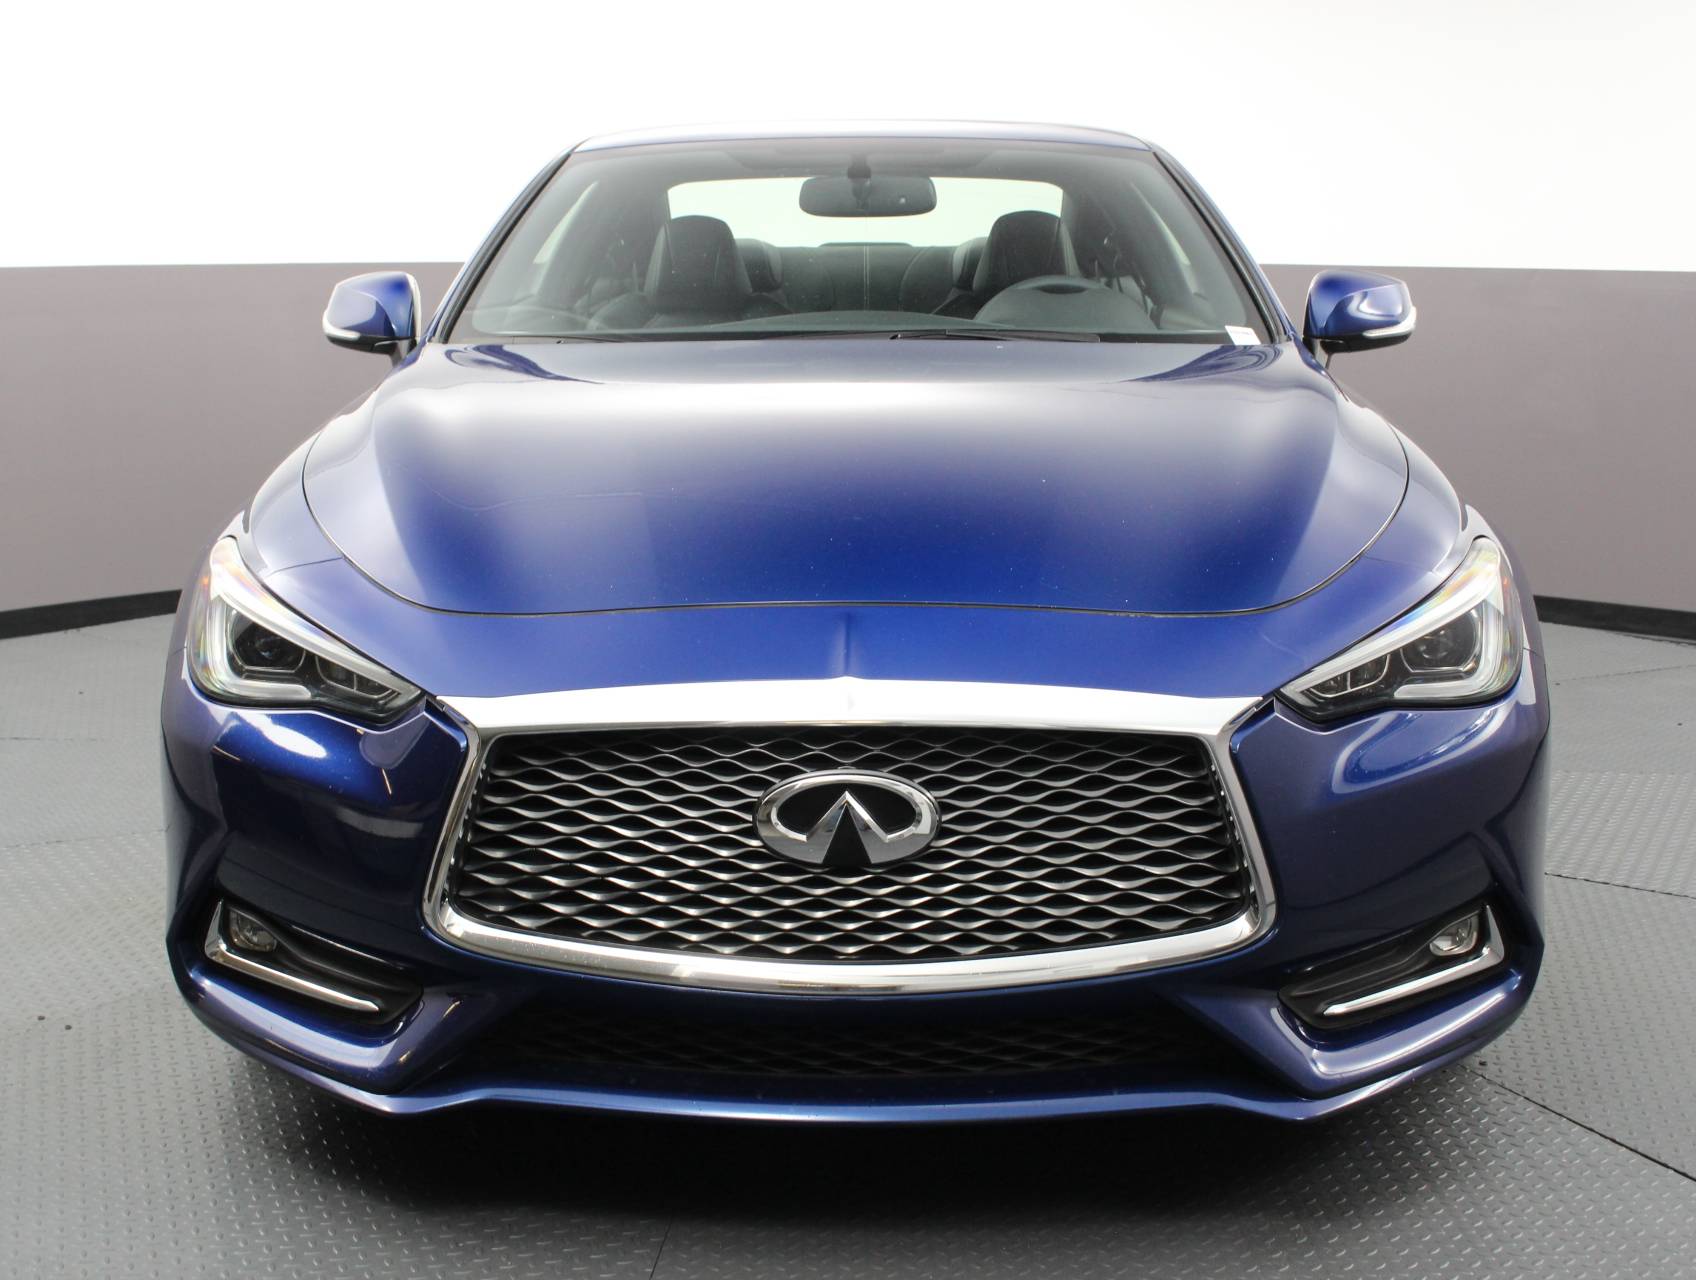 Florida Fine Cars - Used INFINITI Q60 2017 WEST PALM RED SPORT 400